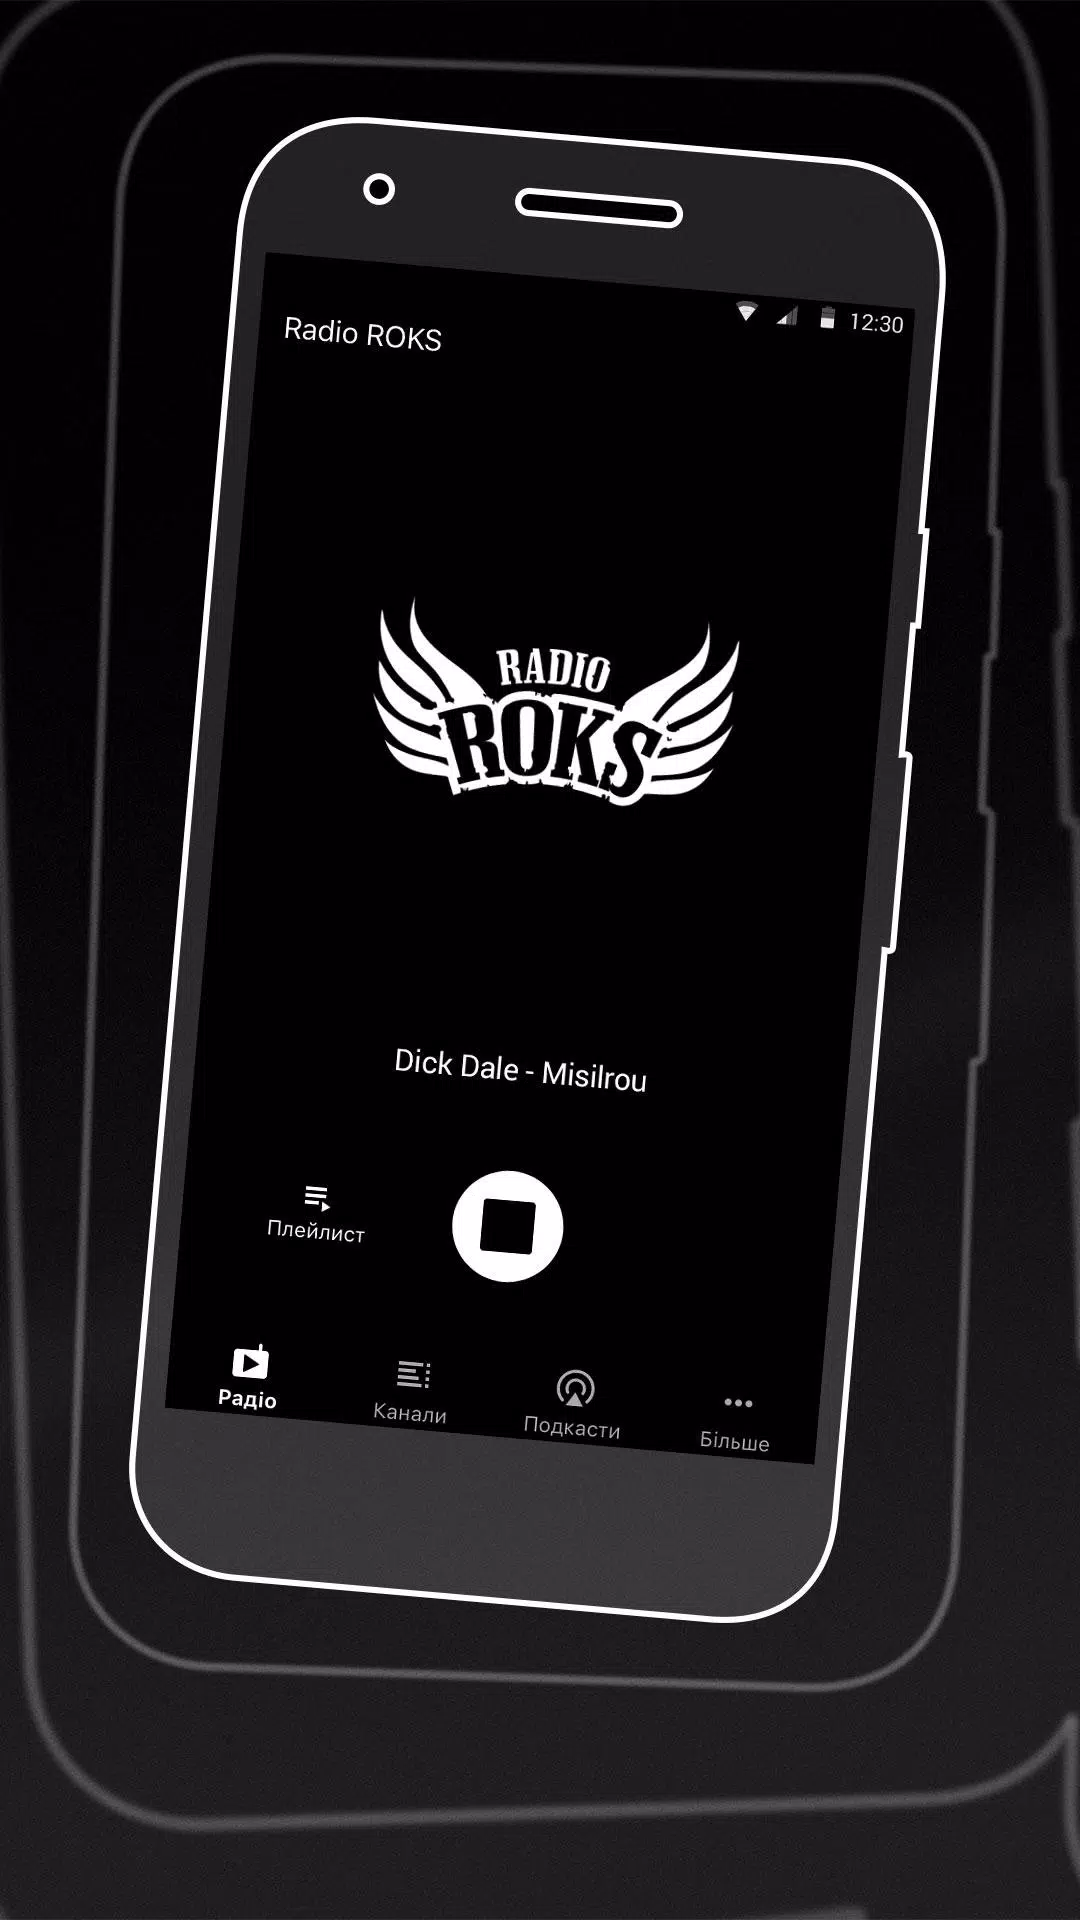 Radio ROKS for Android - APK Download